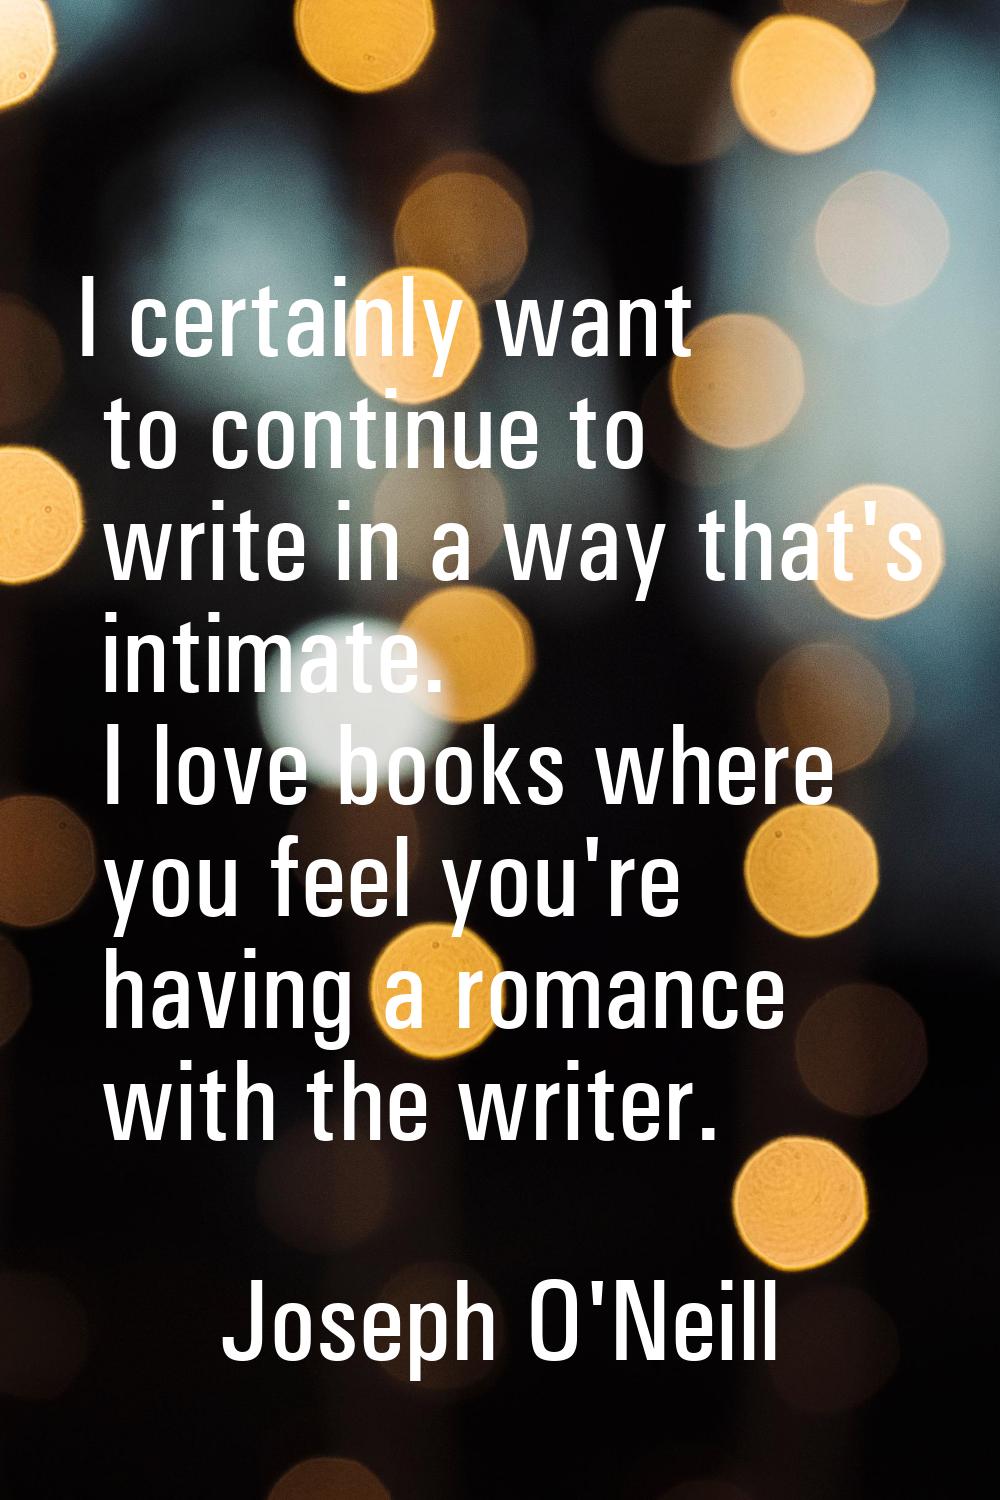 I certainly want to continue to write in a way that's intimate. I love books where you feel you're 